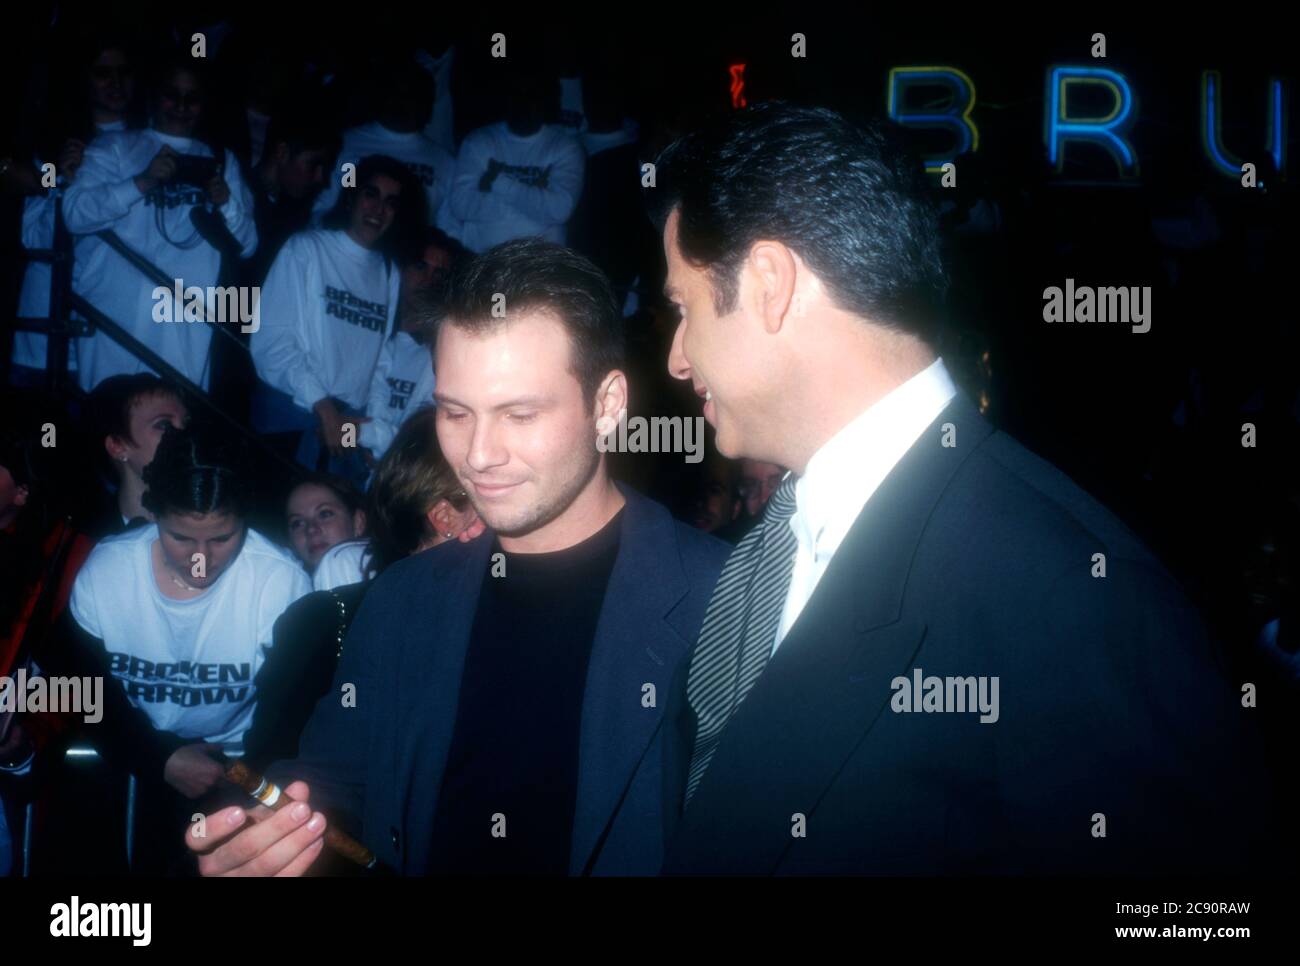 Westwood, California, USA 5th February 1996 Actor Christian Slater and actor John Travolta attend 20th Century Fox' 'Broken Arrow' Premiere on February 5, 1996 at Mann Village Theatre in Westwood, California, USA. Photo by Barry King/Alamy Stock Photo Stock Photo